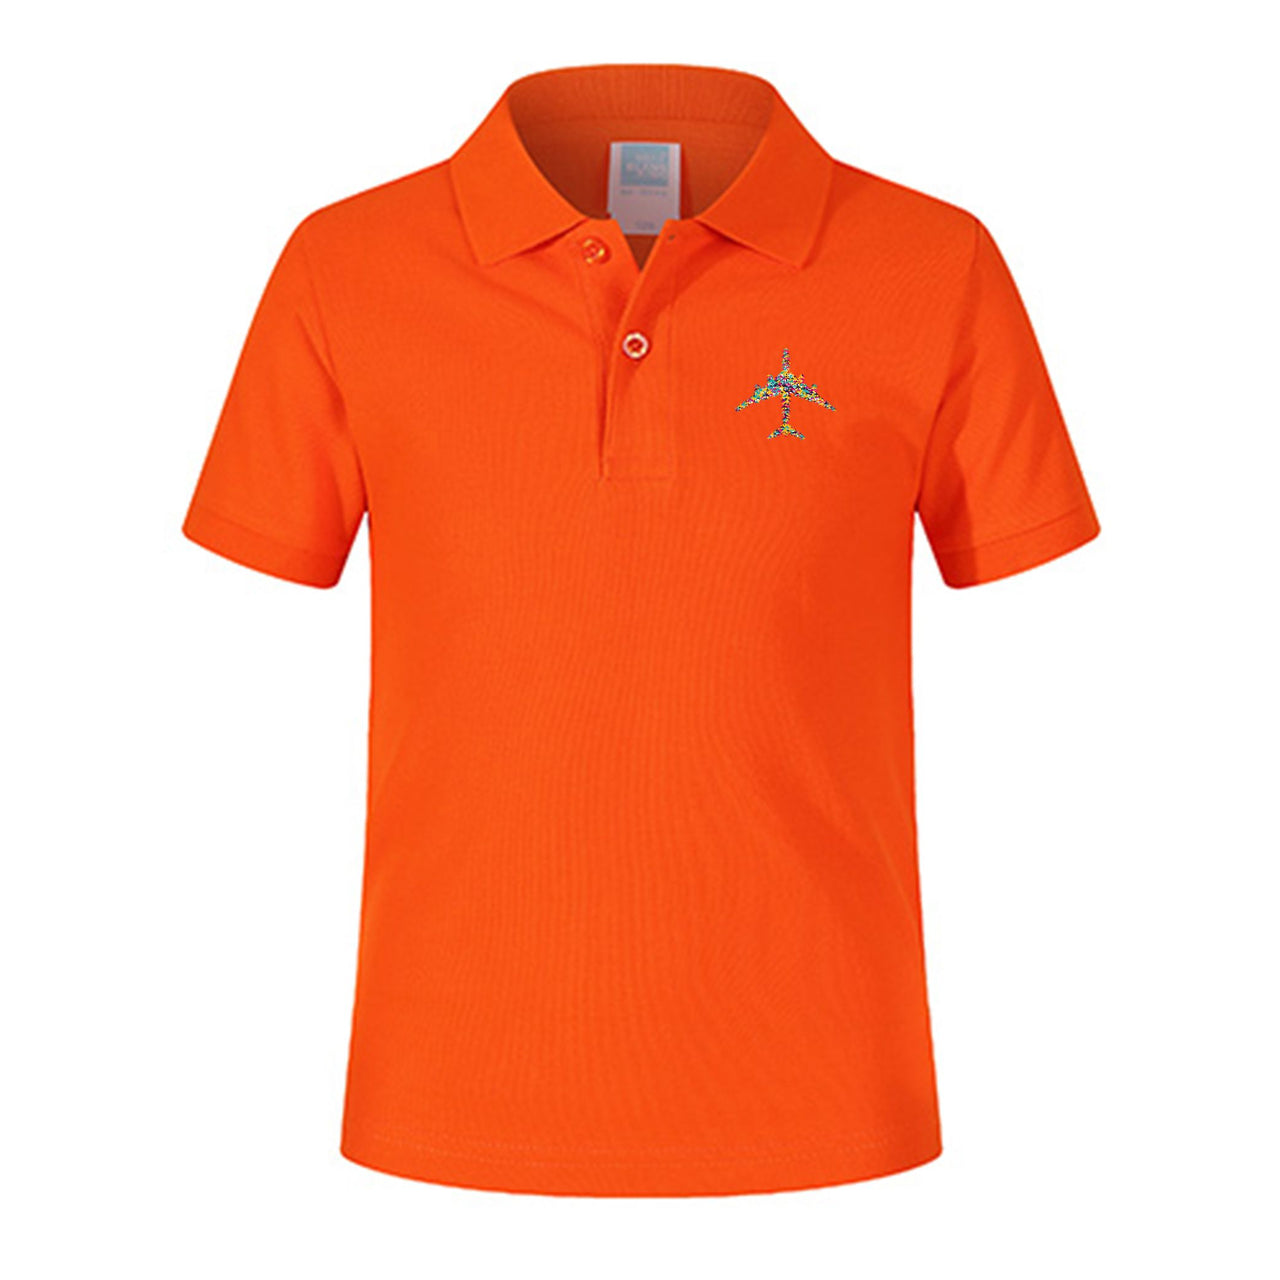 Colourful Airplane Designed Children Polo T-Shirts